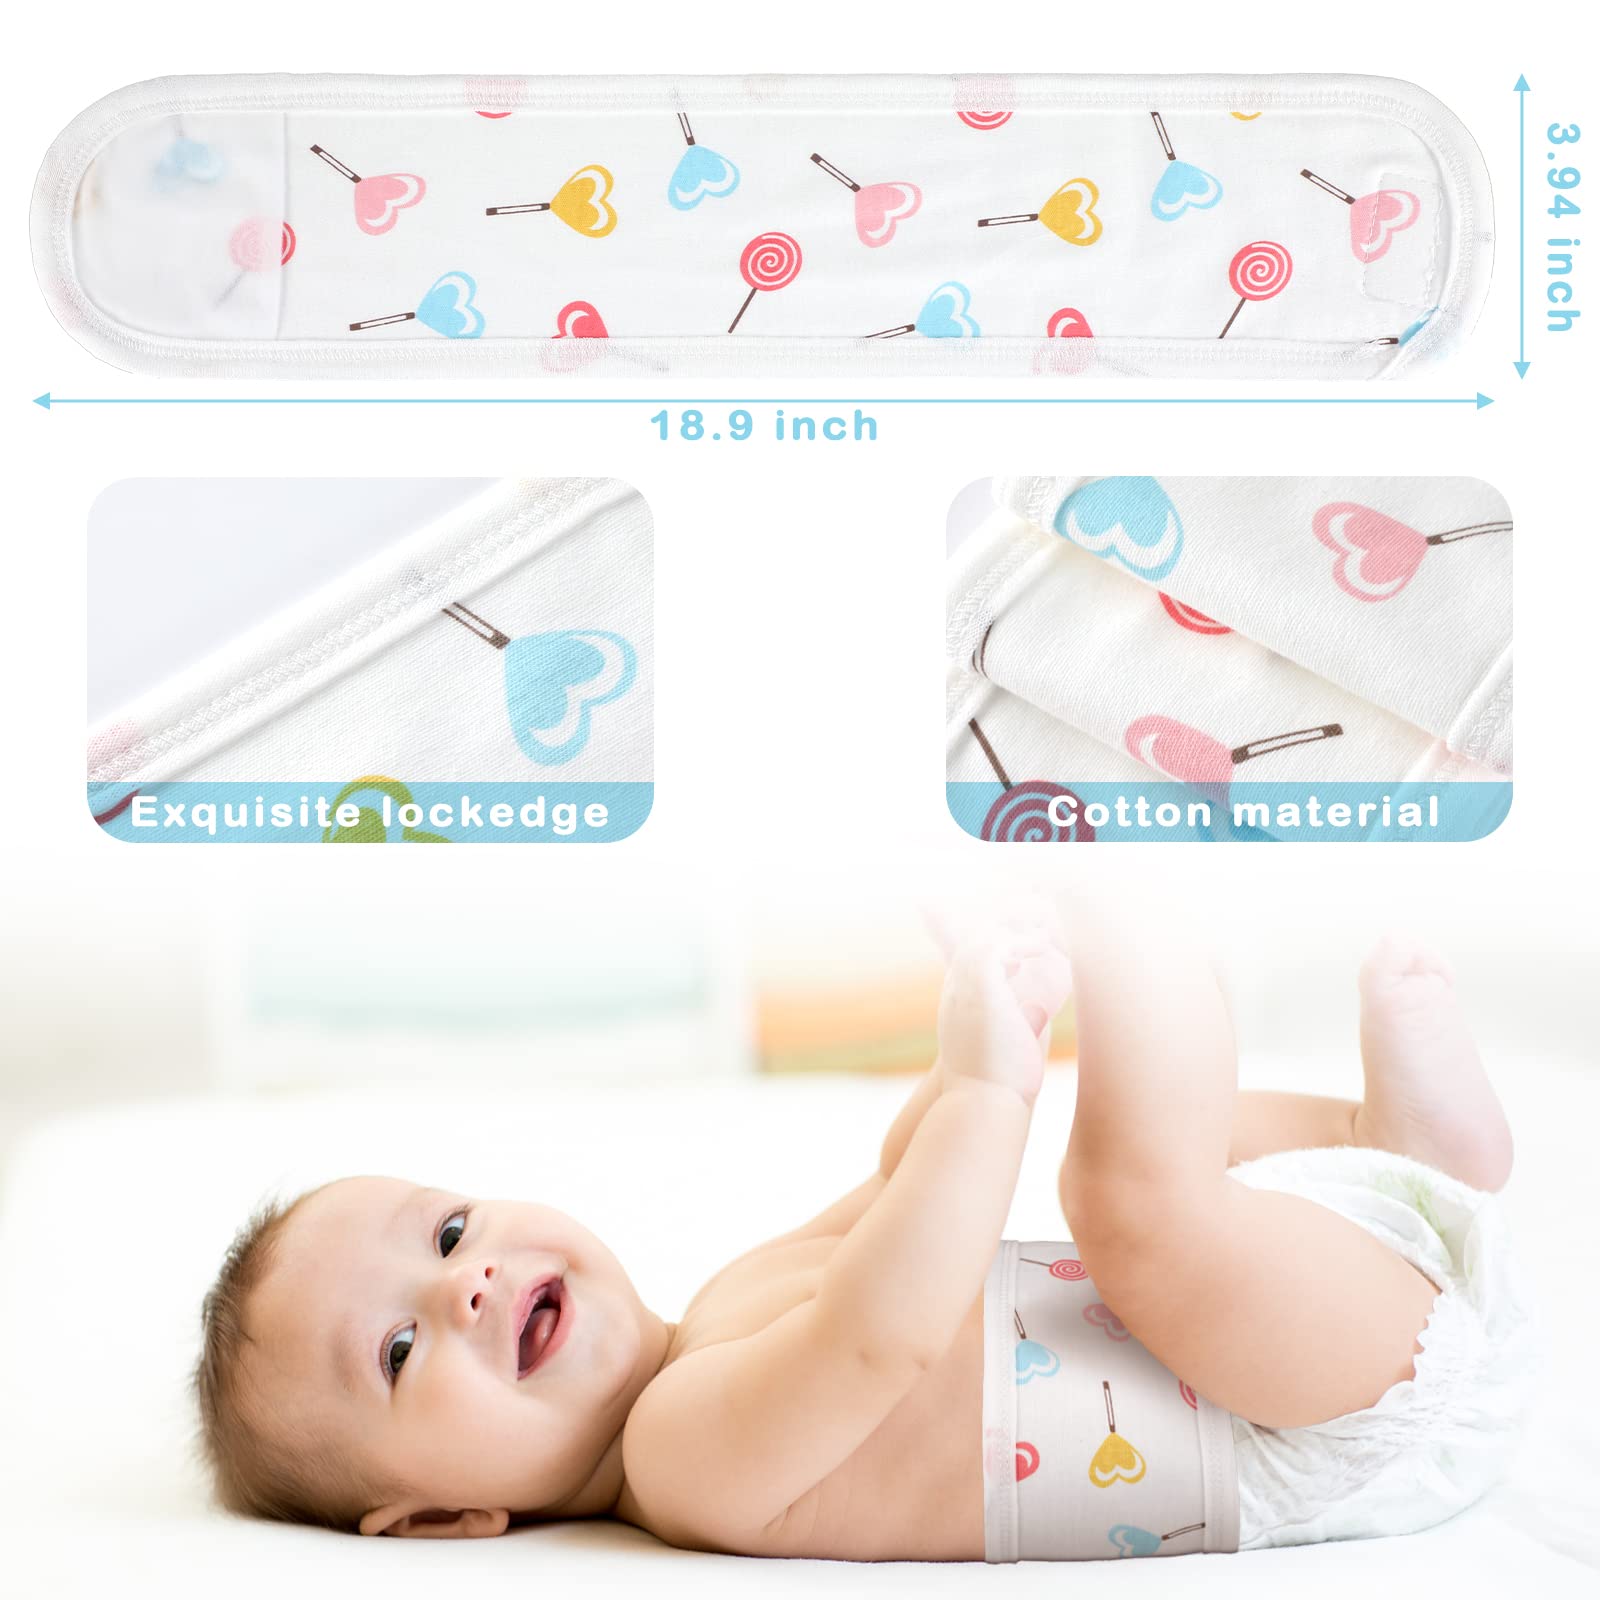 8 Pcs Cartoon Cotton Baby Infant Umbilical Cord Belly Bands Baby Belly Protector Baby Belly Button Band Baby Bellies Umbilical Hernia Belt Soft Newborn Navel Belt for 0-12 Months Babies, 4 Styles